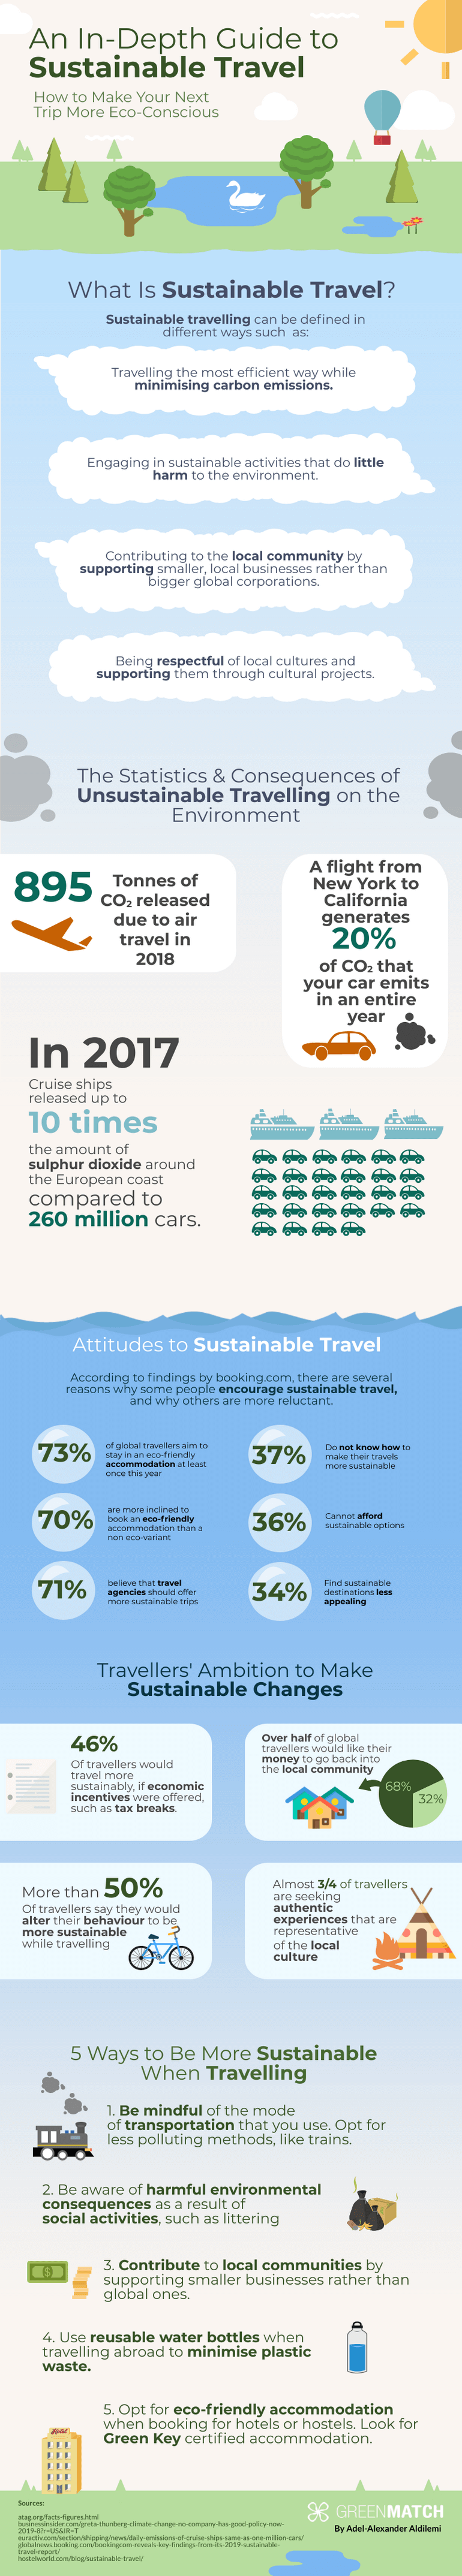 infographic: guide to sustainable travel